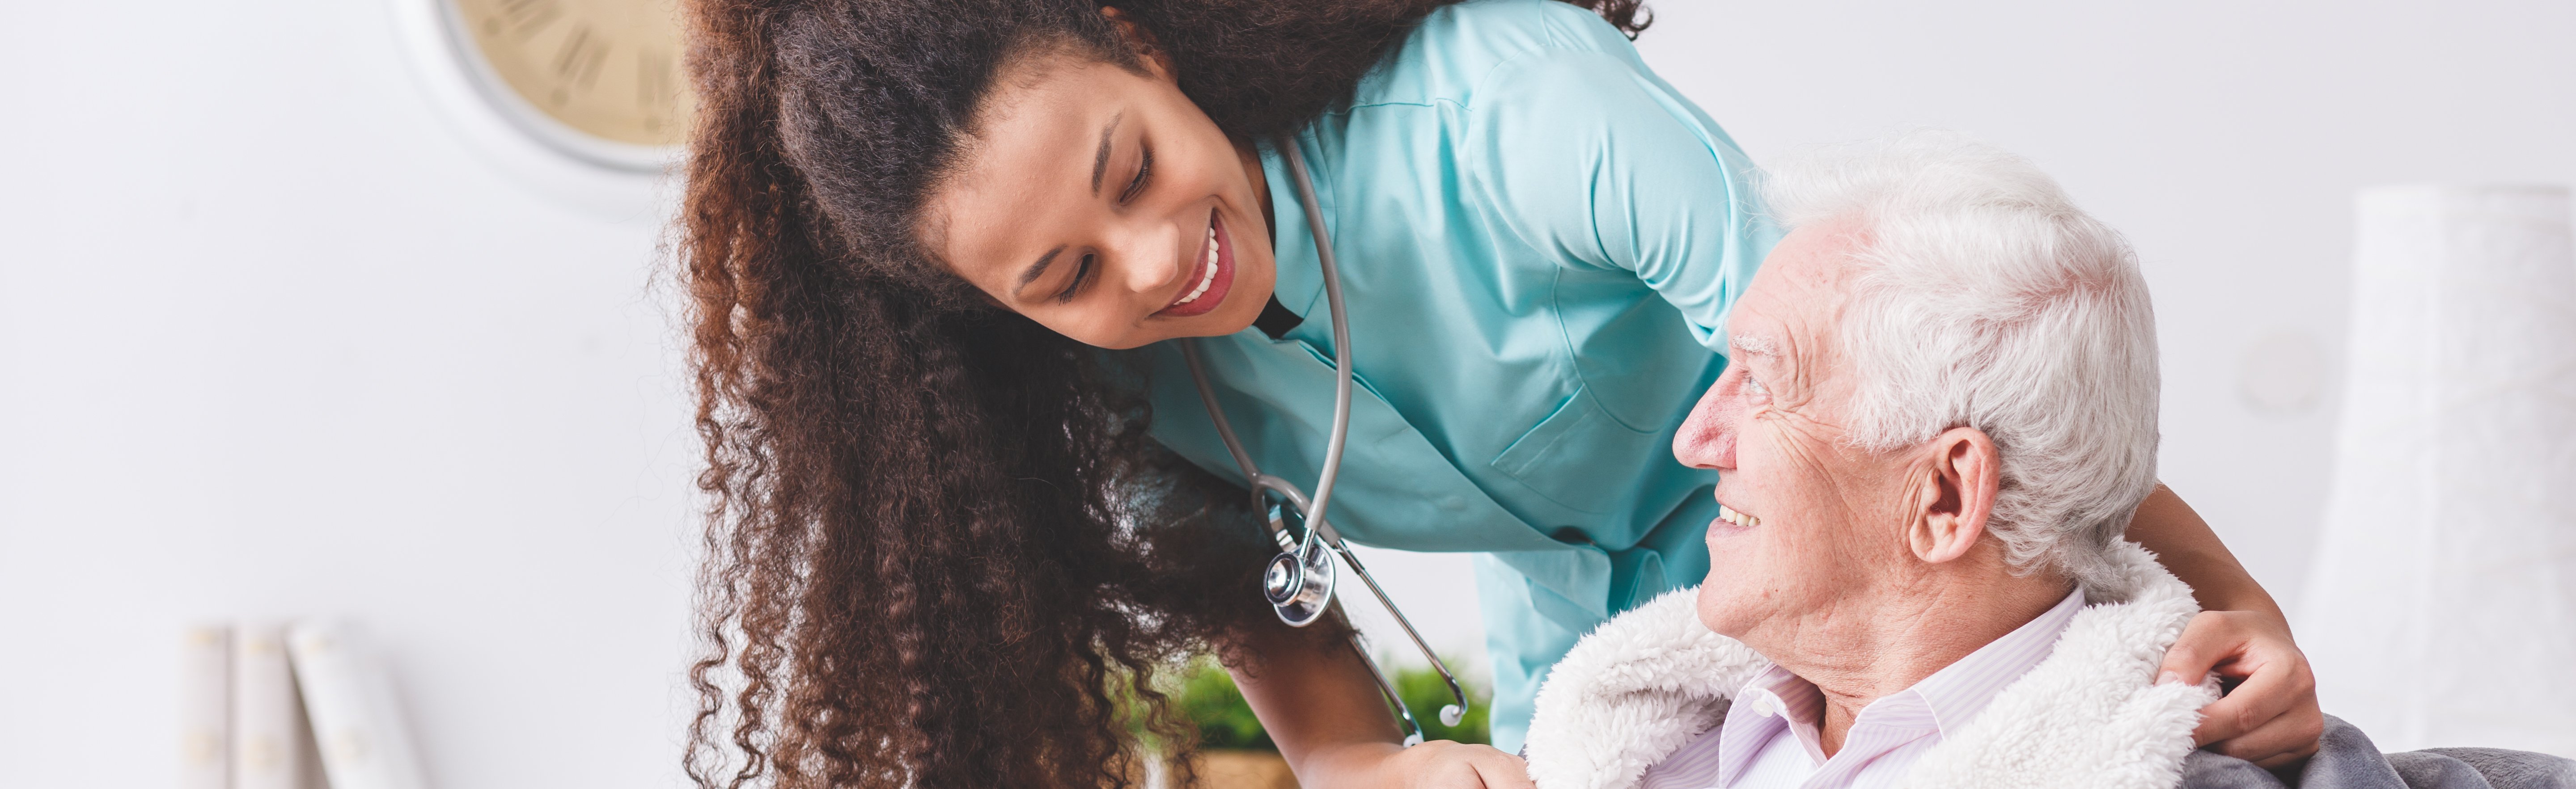 What Is Per Diem Nursing and How Can You Use It?